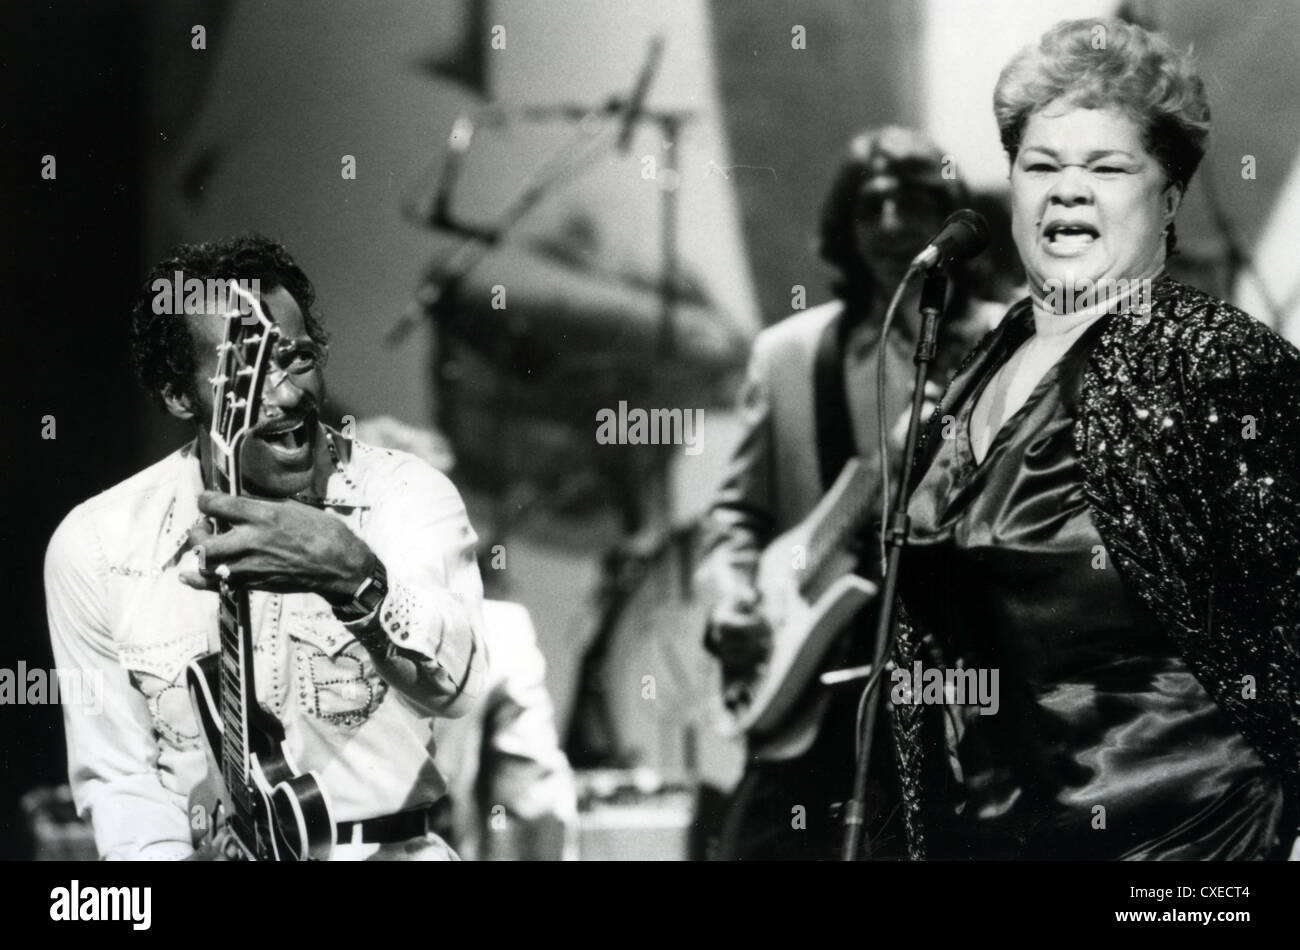 CHUCK BERRY with  Etta James in 1987 Universal film 'Chuck Berry Hail ! Hail ! Rock 'n' Roll' Stock Photo